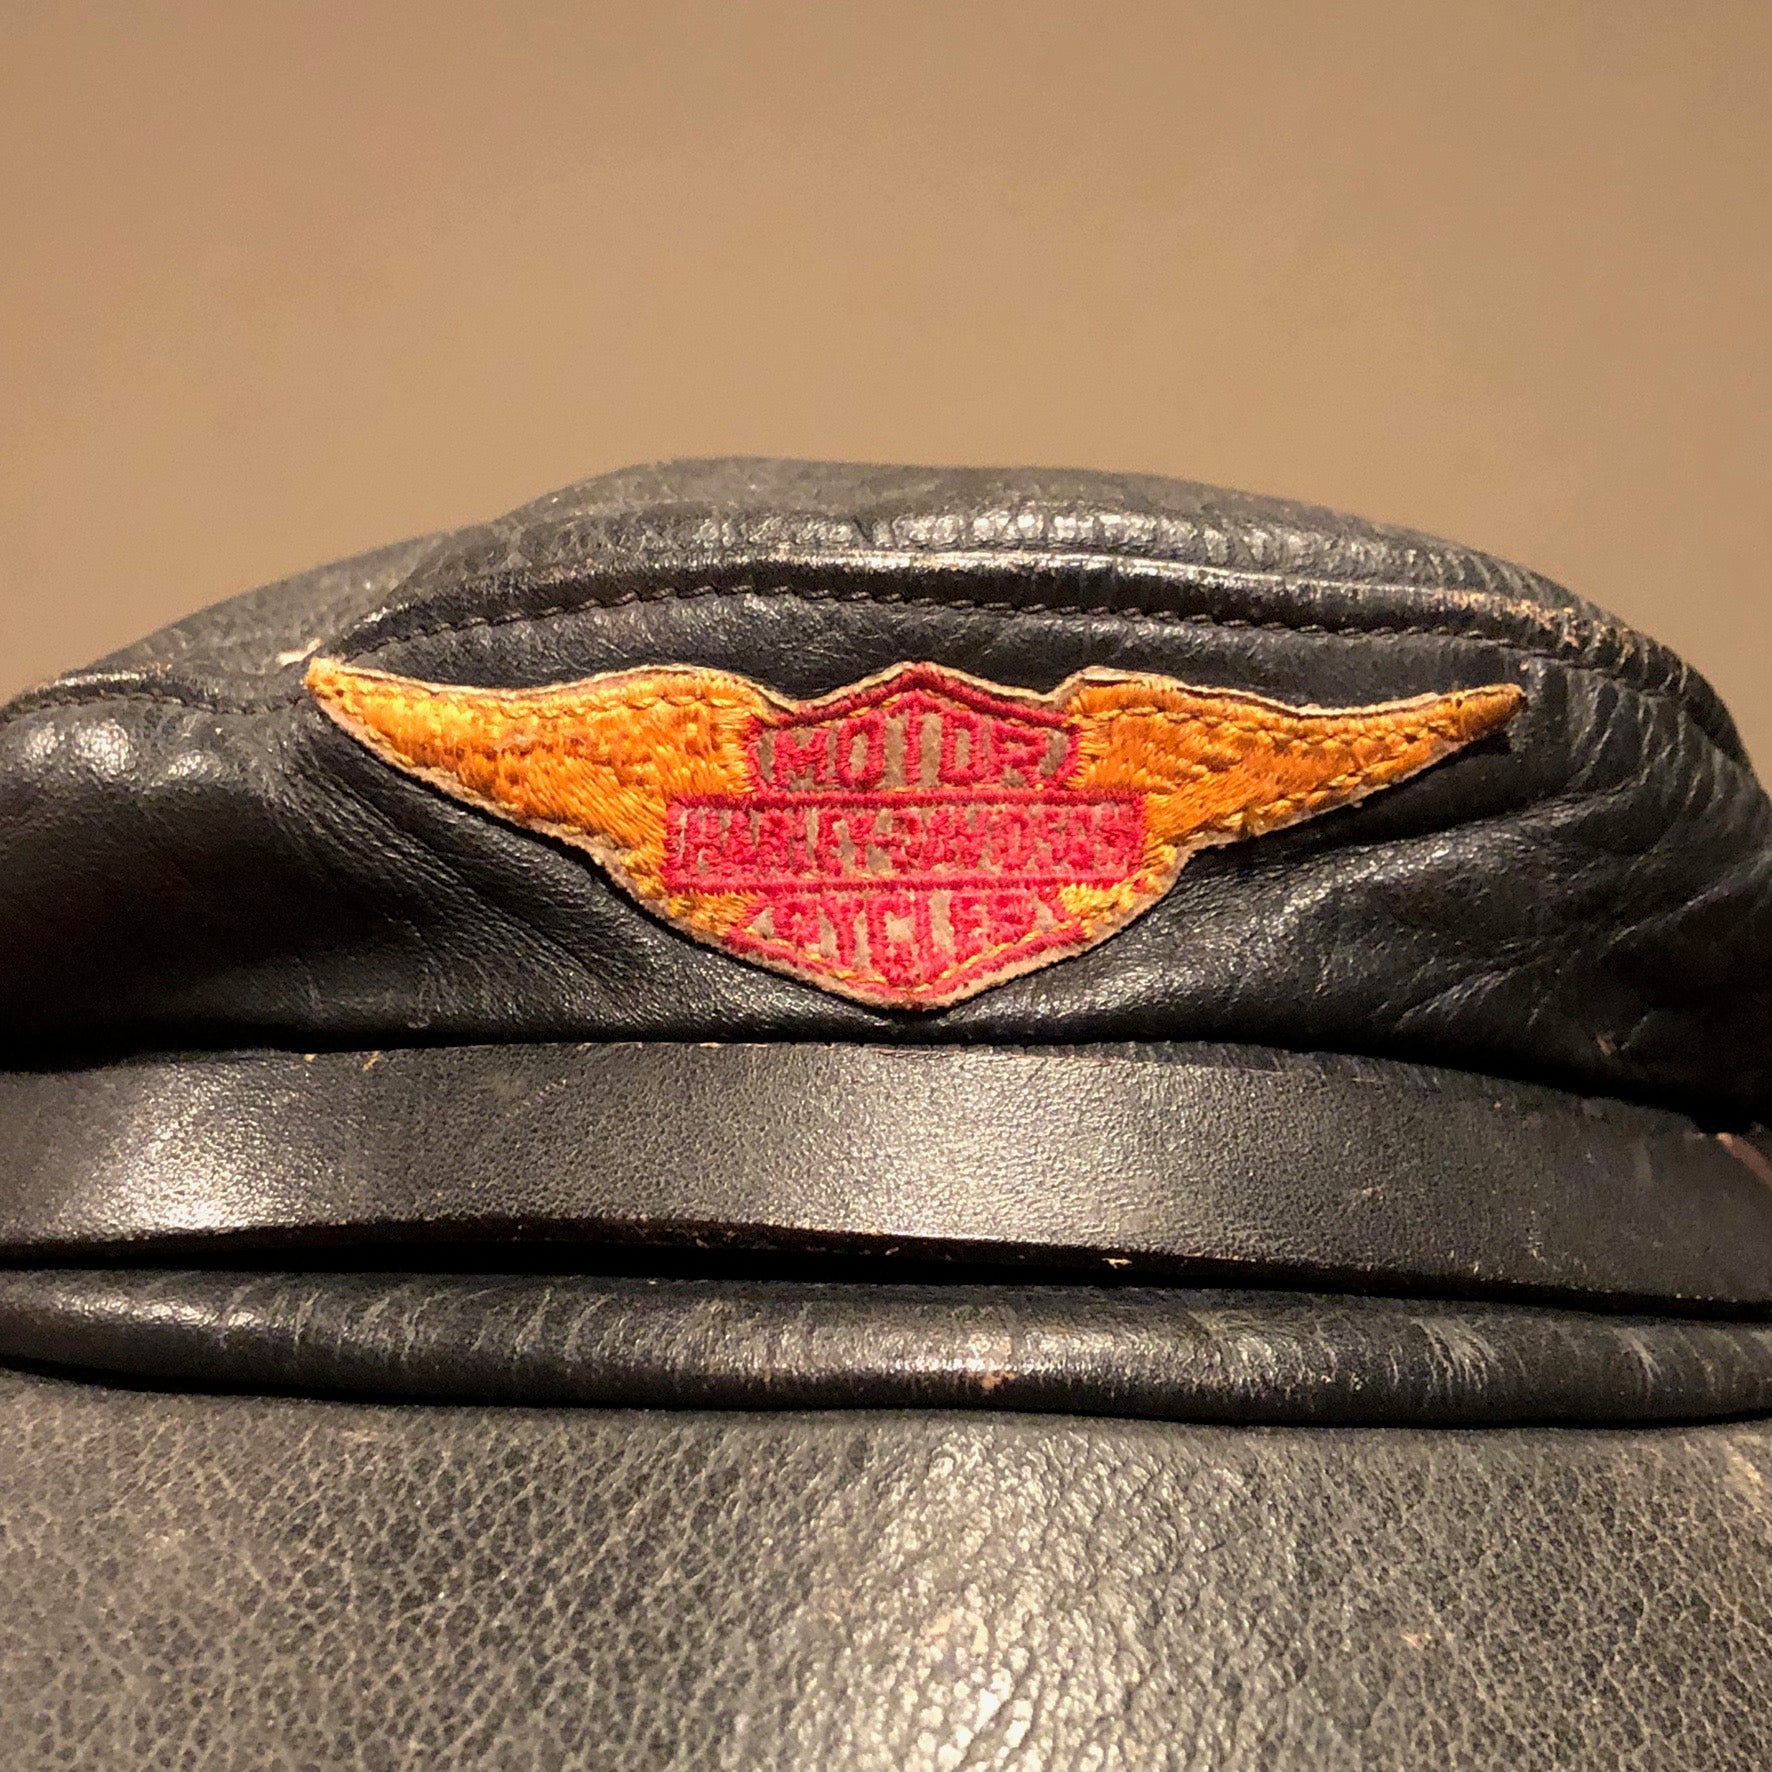 1960s Harley Patch on Vintage Harley Davidson Leather Cap - 1960s - Large - The Leather Goods - El Cajon - Brando Wild Ones - Old Patch - Captain Hat - Newsboy